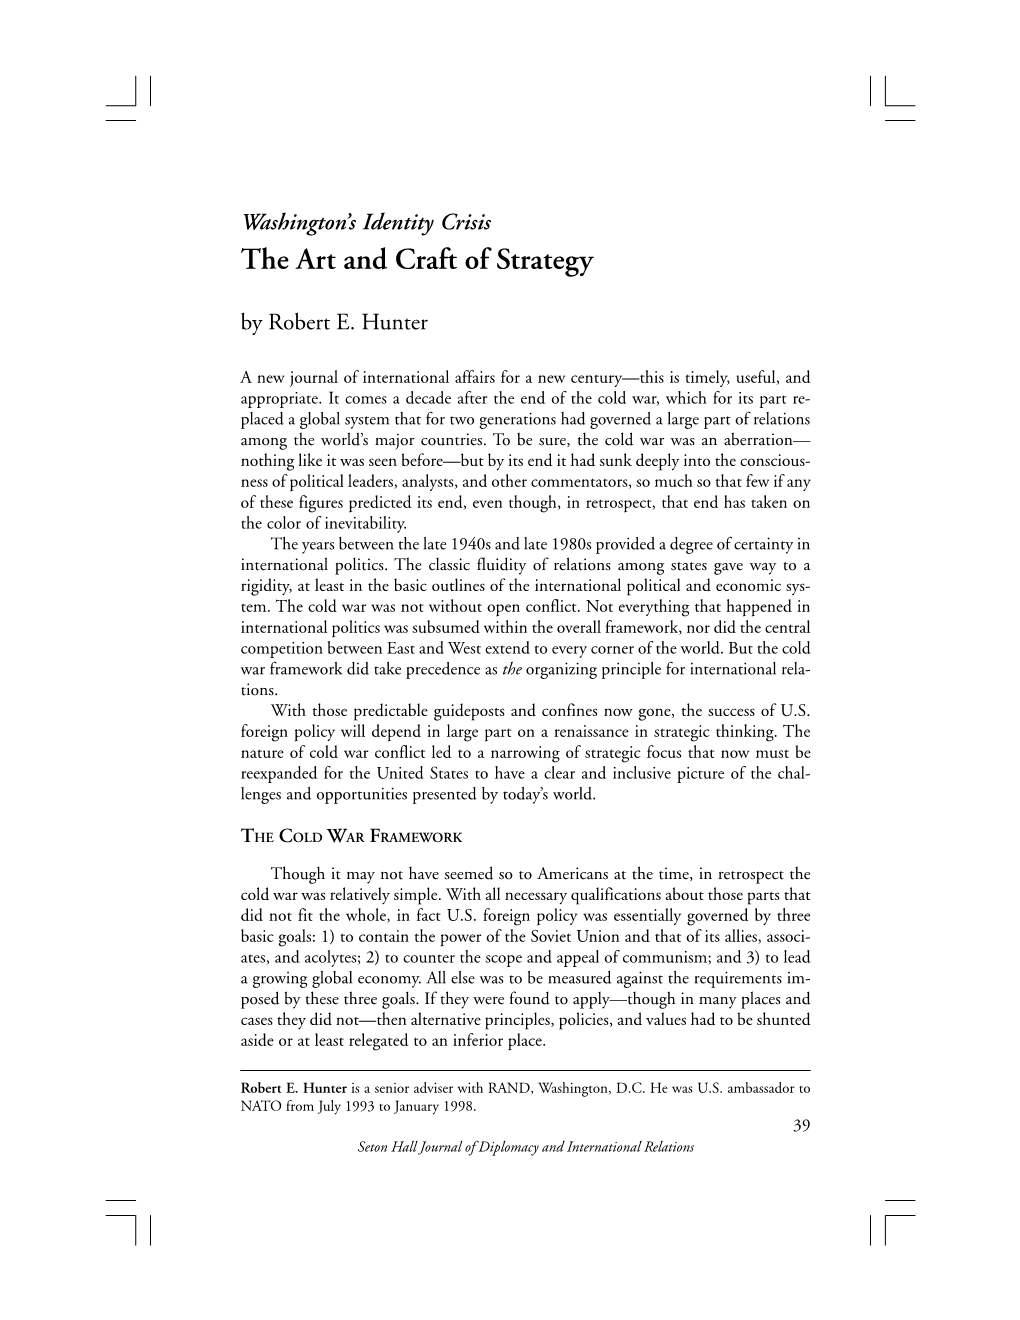 The Art and Craft of Strategy by Robert E